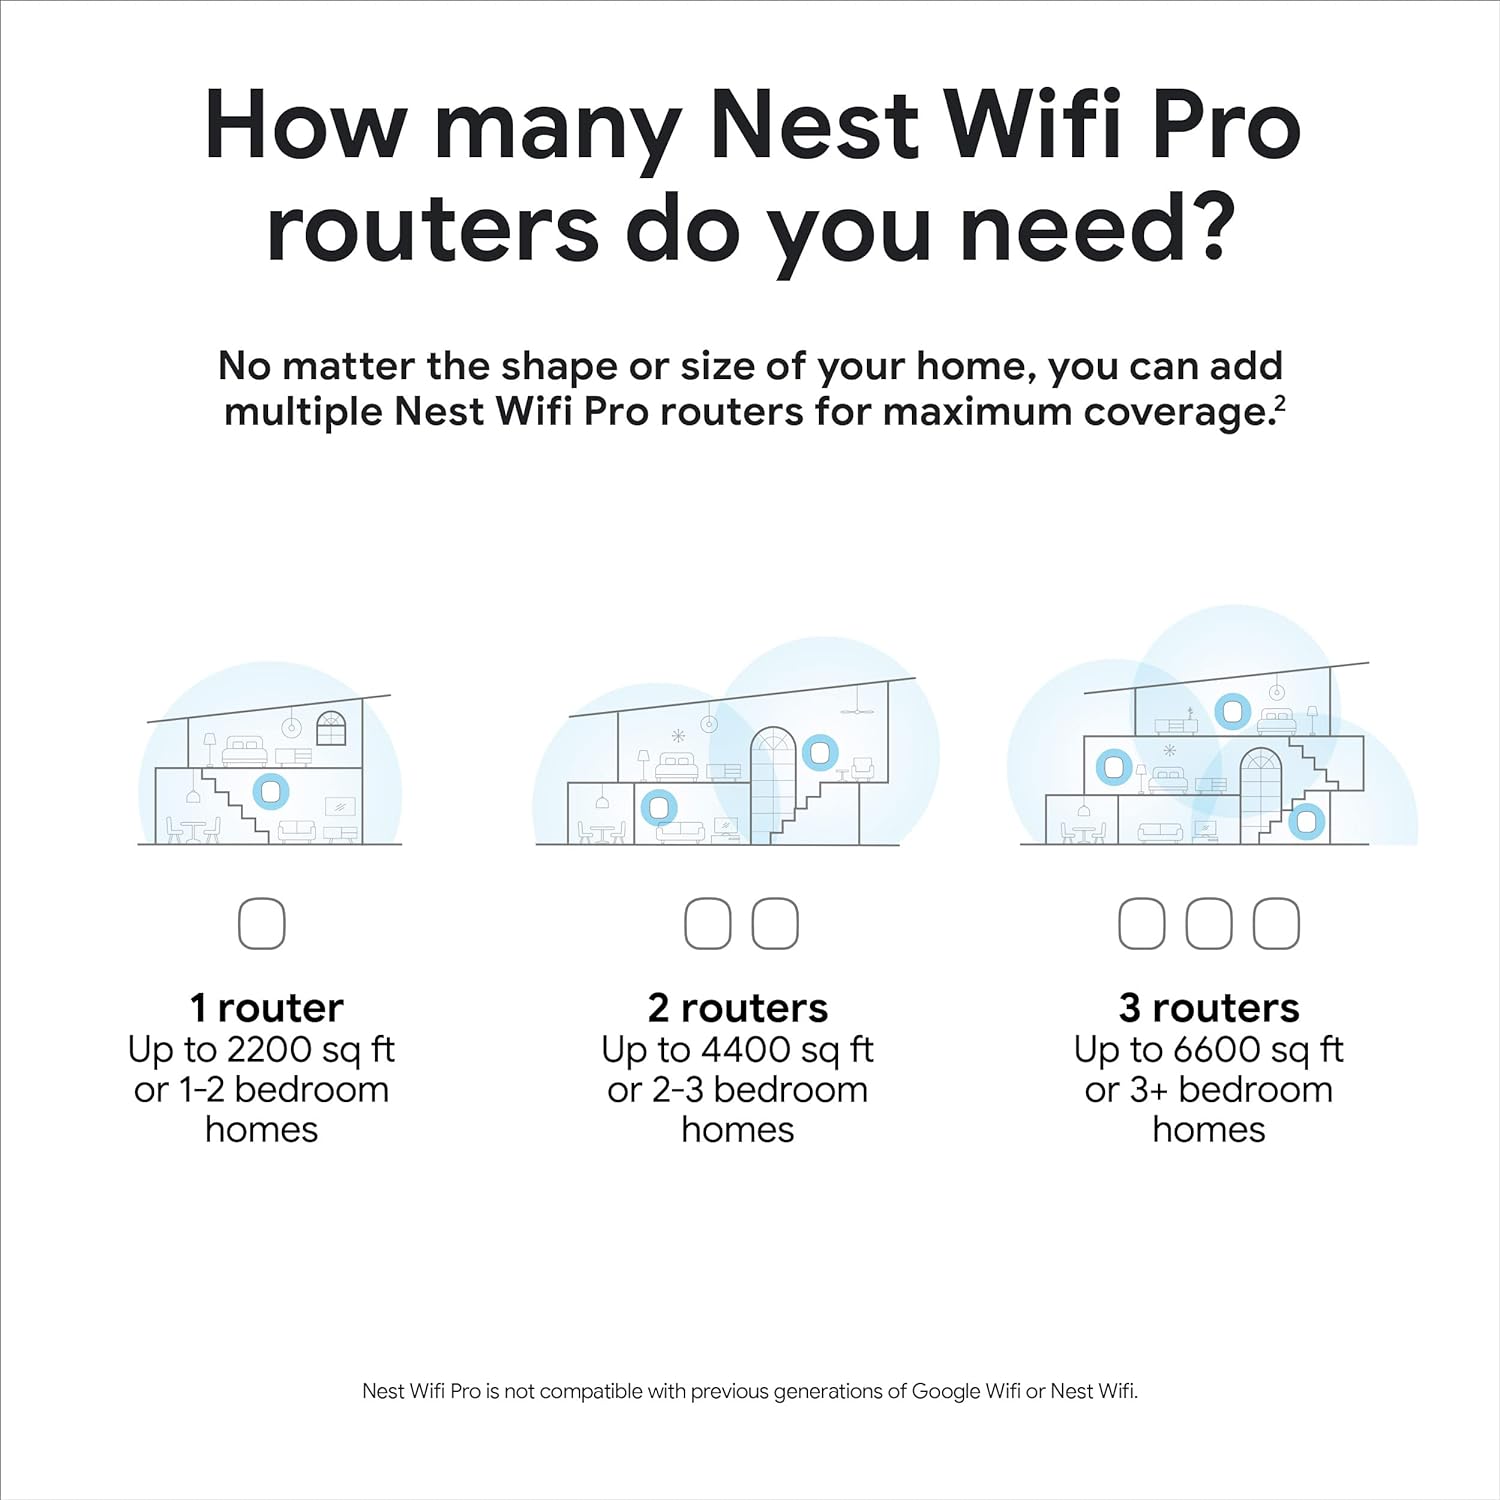 Google Nest WiFi Pro - Wi-Fi 6E - Reliable Home Wi-Fi System with Fast Speed and Whole Home Coverage - Mesh Wi-Fi Router - Lemongrass